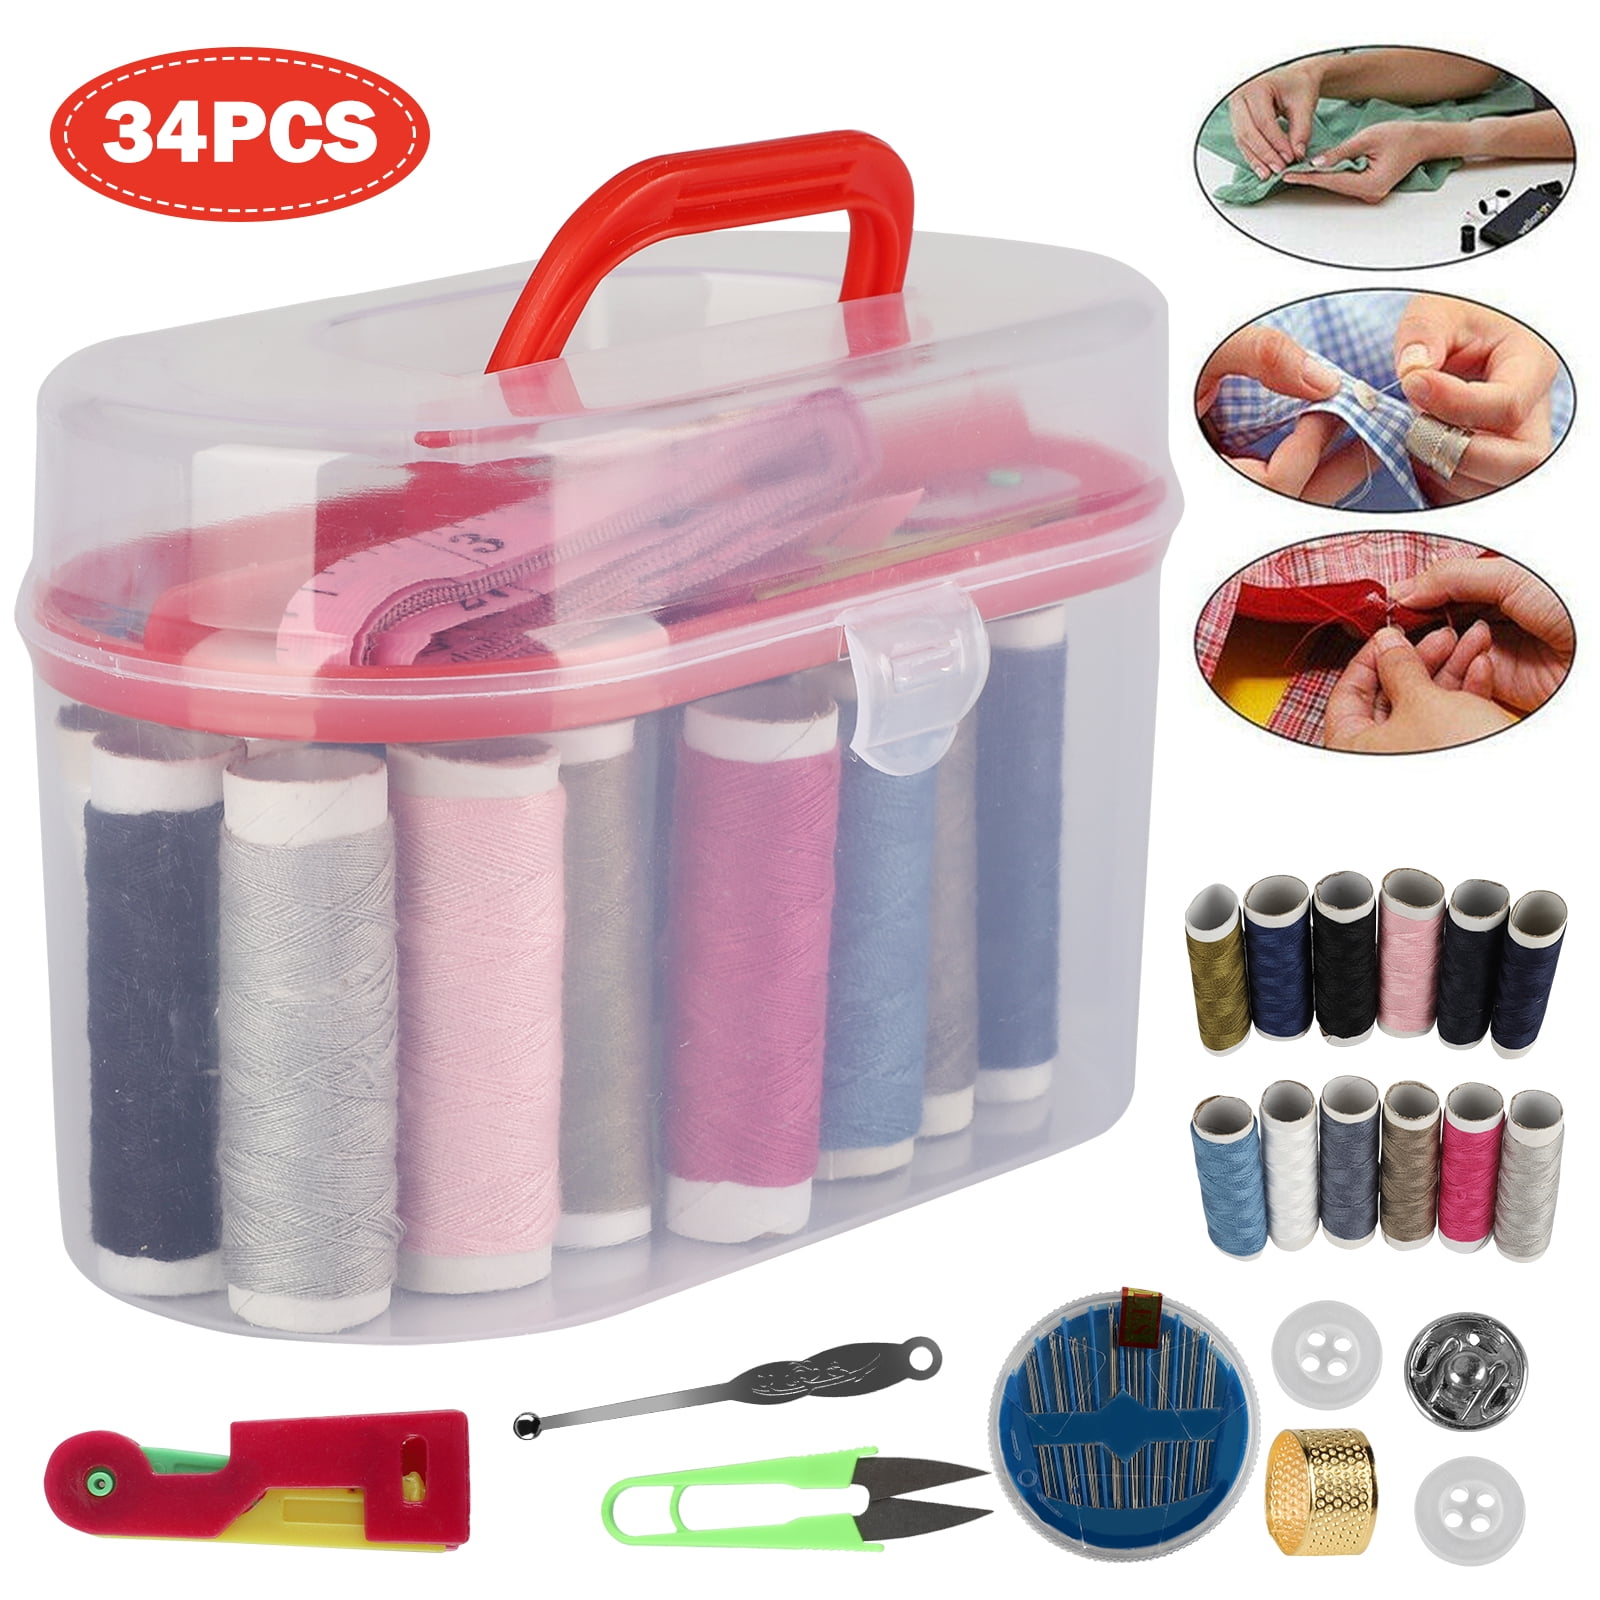 HERCHR Small Sewing Kit for Adults, Needle and Thread Kit for Sewing,  Sewing Kit for Beginners with Scissors Thimble Practical Sewing Repair Kit  for